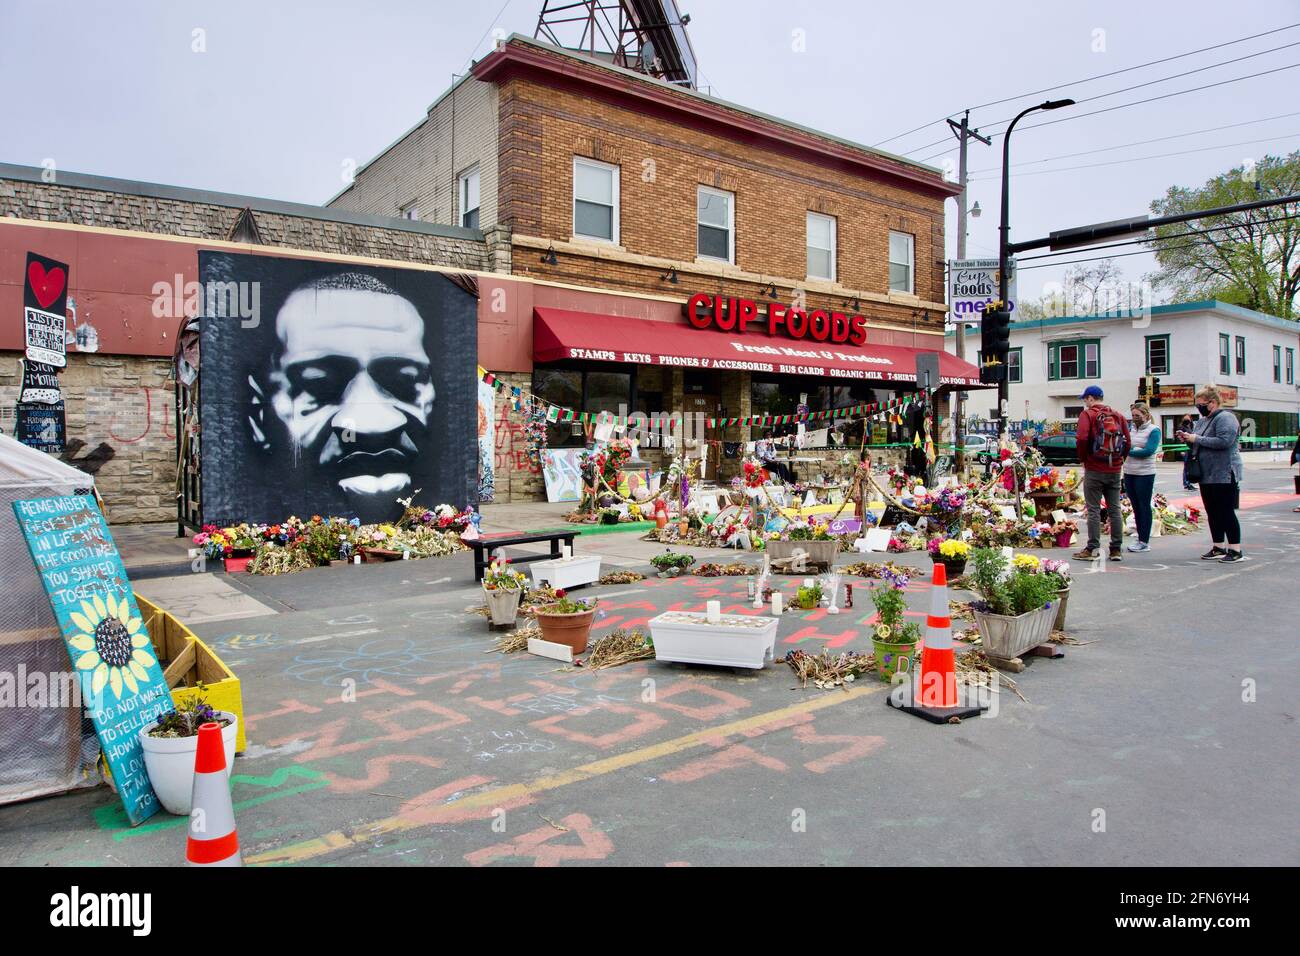 Visitors at George Floyd Memorial Square at 38th & Chicago. Cup Foods. Visitors pay respects at shrine and mural covered in flowers. Minneapolis, MN Stock Photo